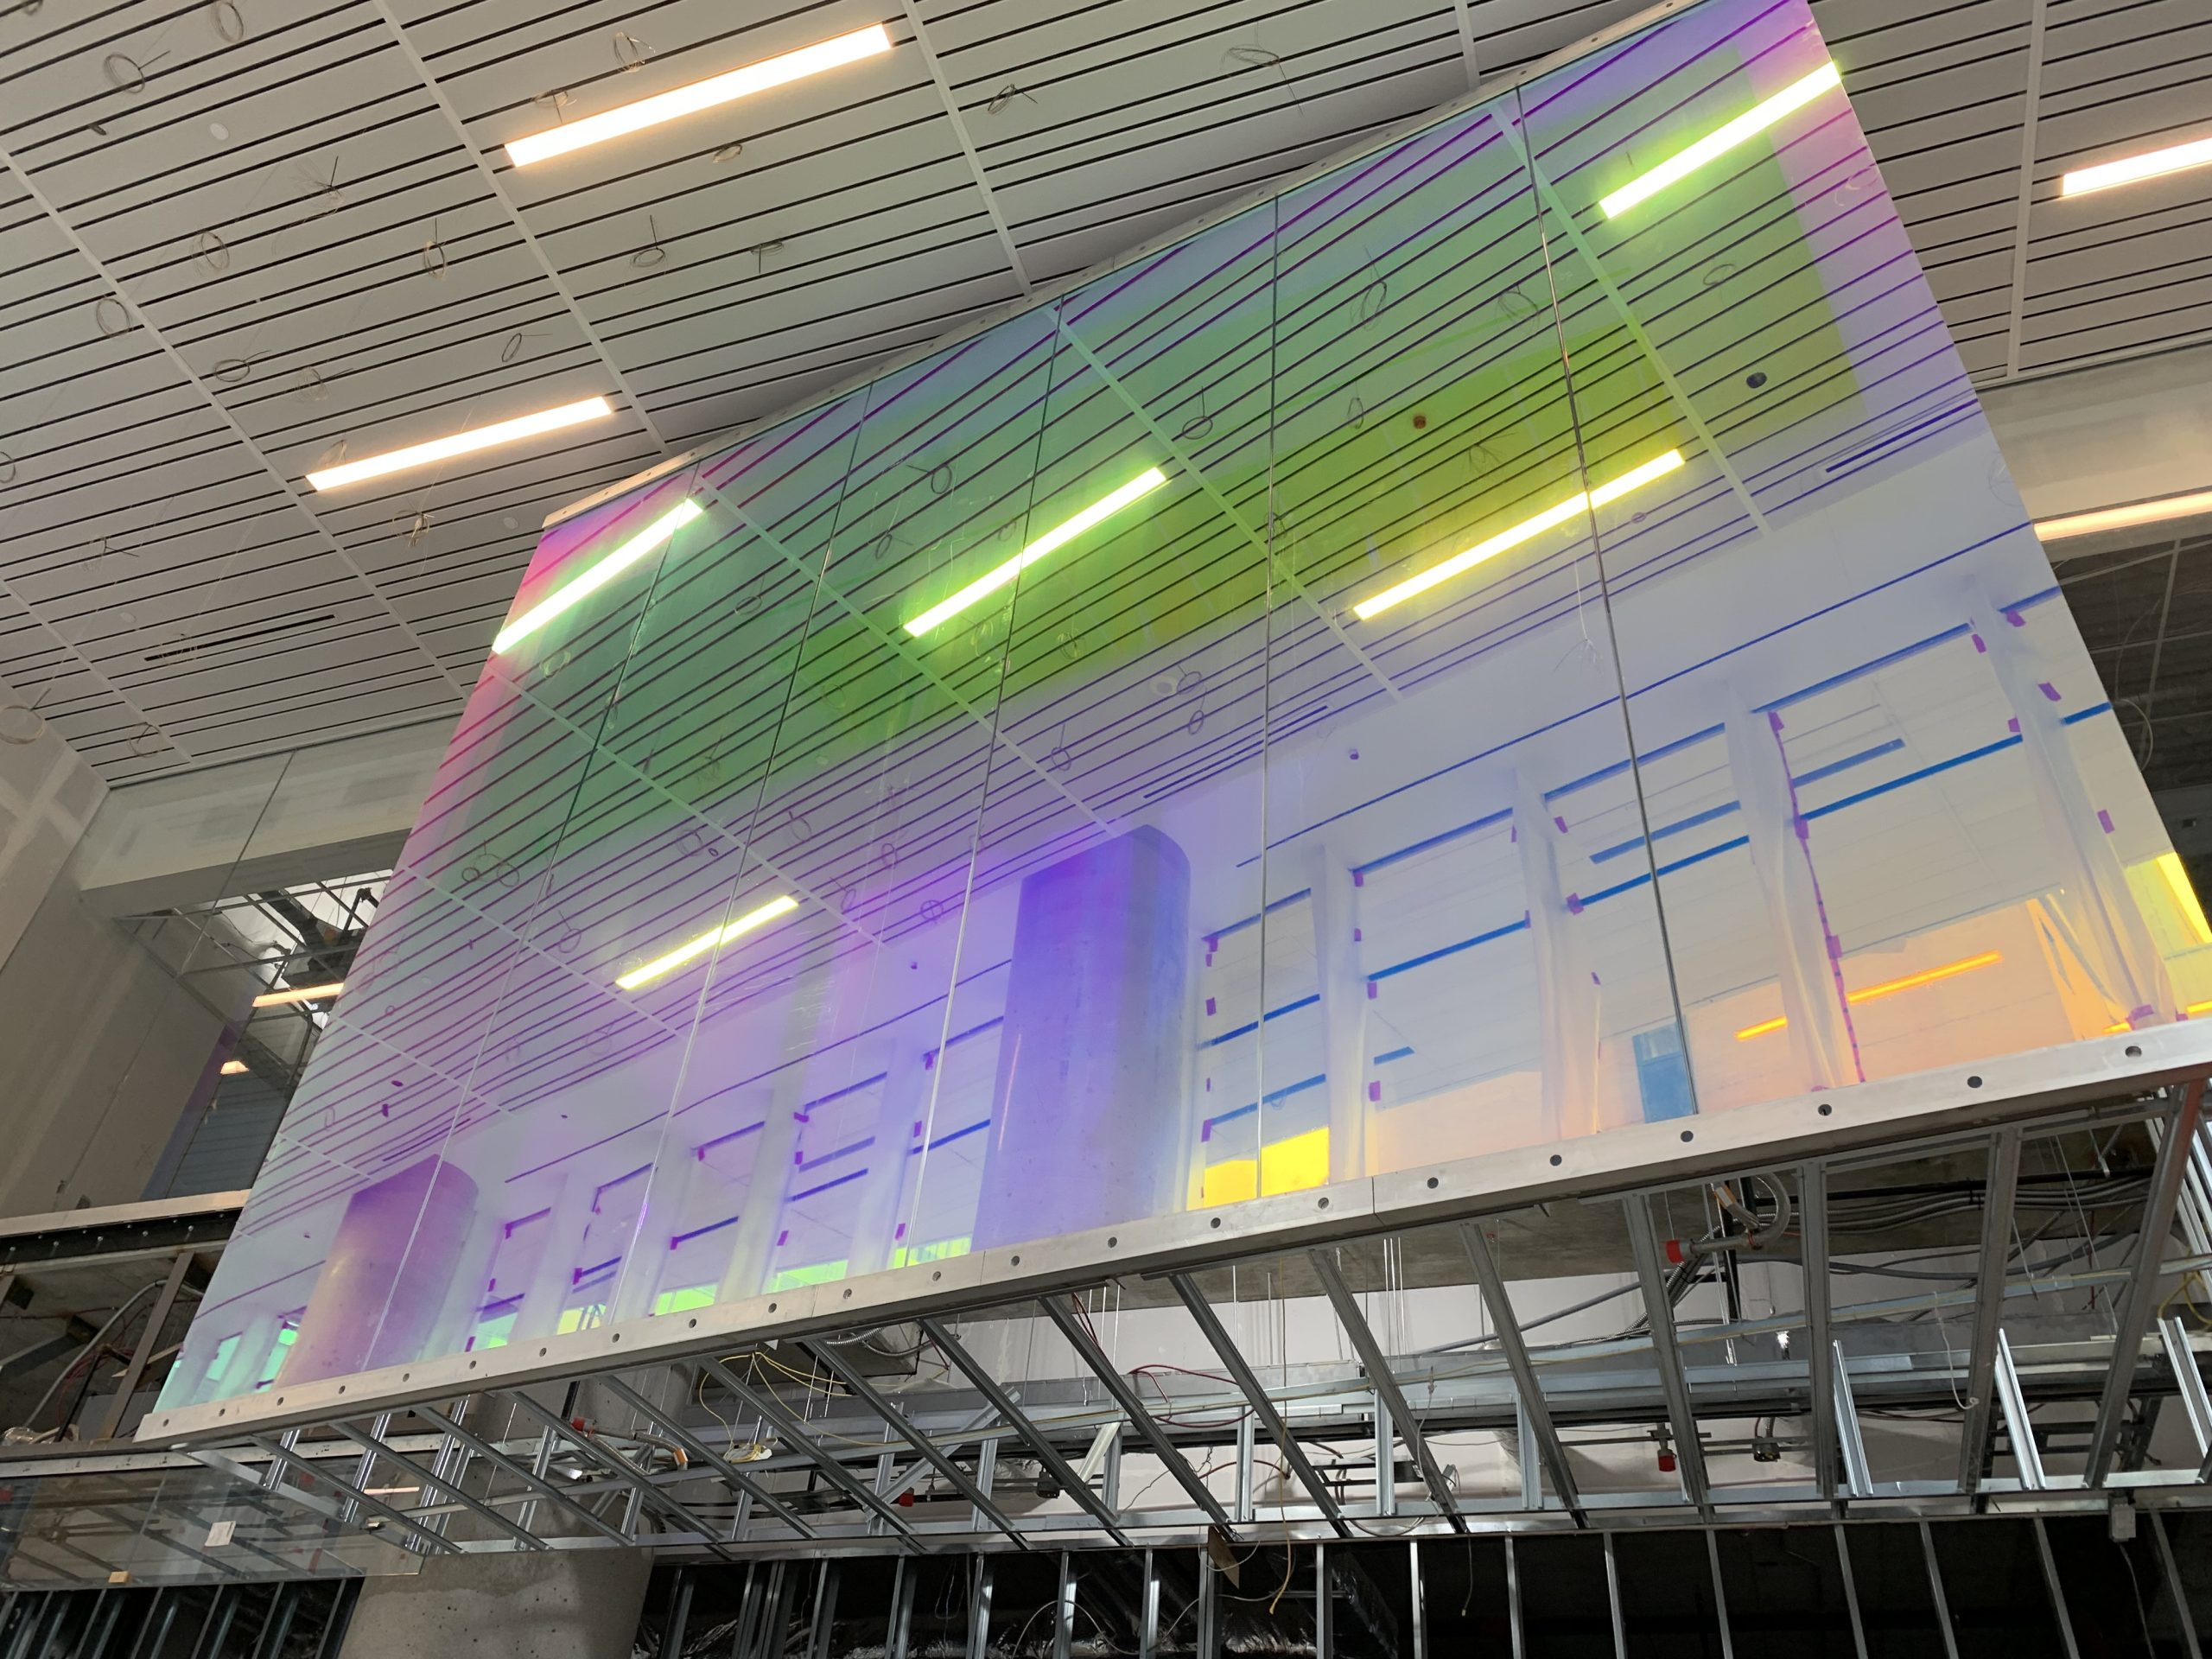 Dichroic and Digitally Printed Architectural Glass for Sickkids